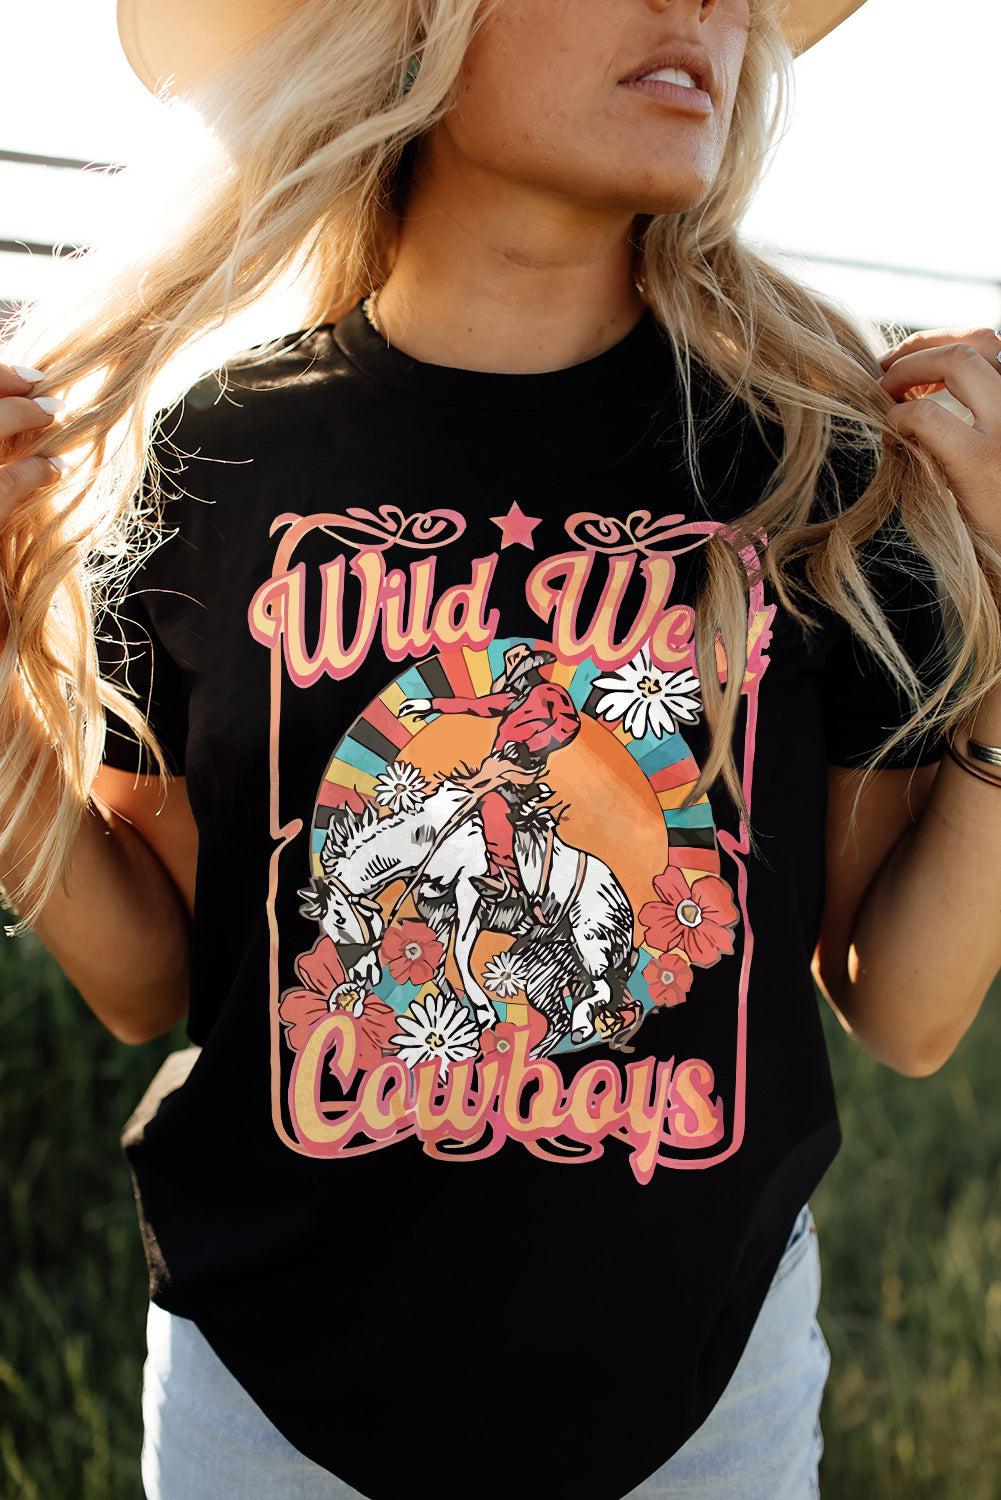 WILD WEST COWBOYS Graphic Tee Shirt BLUE ZONE PLANET